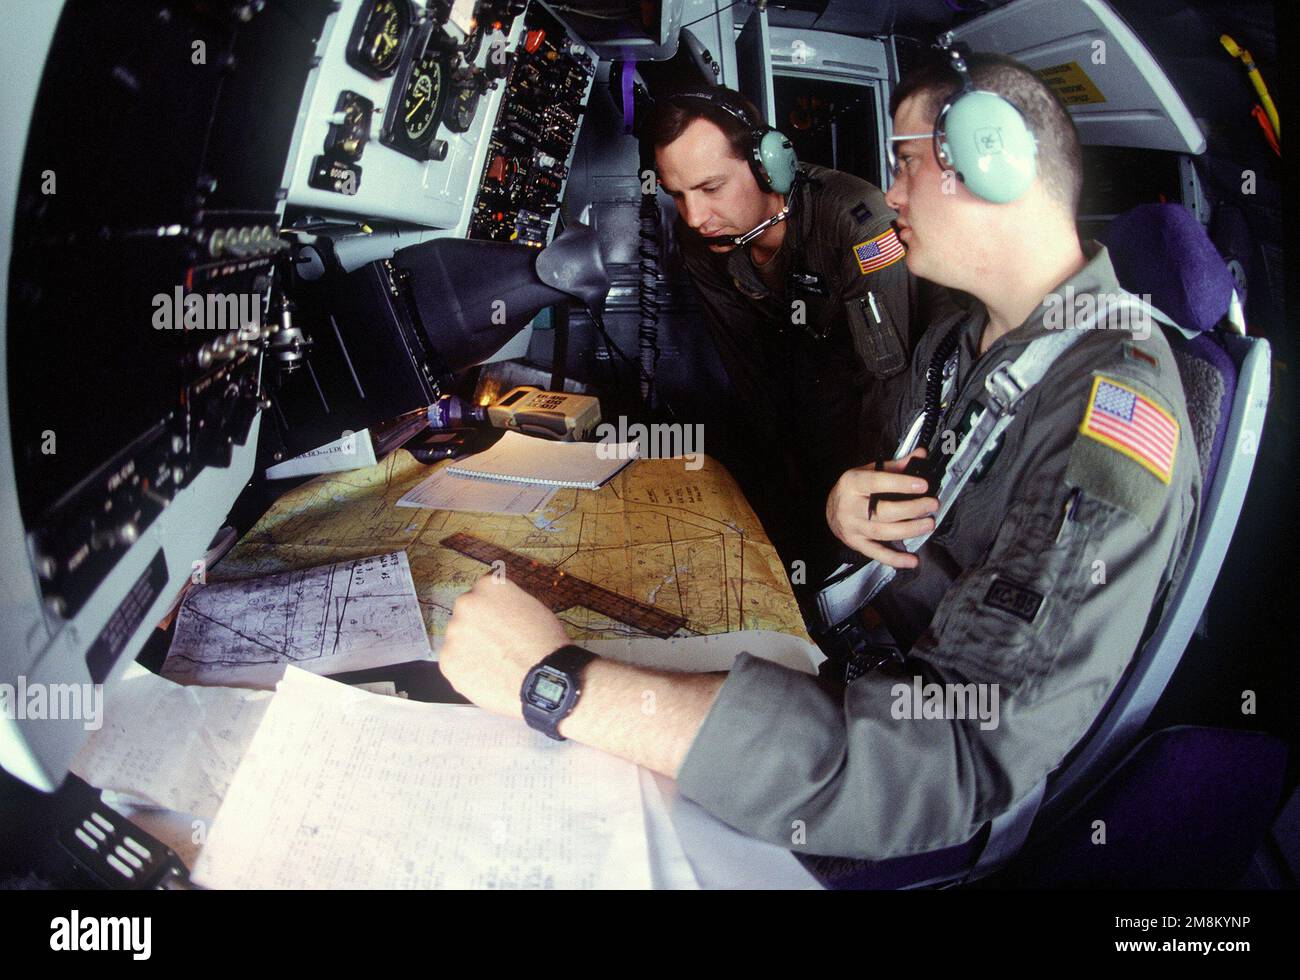 Navigators, 2nd Lieutenant Mathew C. Brennan (Right, Hometown: Baltimore, Maryland) and Captain Rod F. Cosgrove (Left, Hometown: Colorado Springs, Colorado) from the 96th Air Refueling Squadron, Fairchild Air Force Base, Washington check the navigation maps during a mission in a KC-135 aircraft over Jordan in support of the Air Power Expeditionary Force. An ancillary mission of the Force is to assist US Air Force and other multinational forces operating in Saudi Arabia and other nearby countries patrol the no-fly zone over southern Iraq. Subject Operation/Series: AIR POWER EXPEDITIONARY FORCE Stock Photo